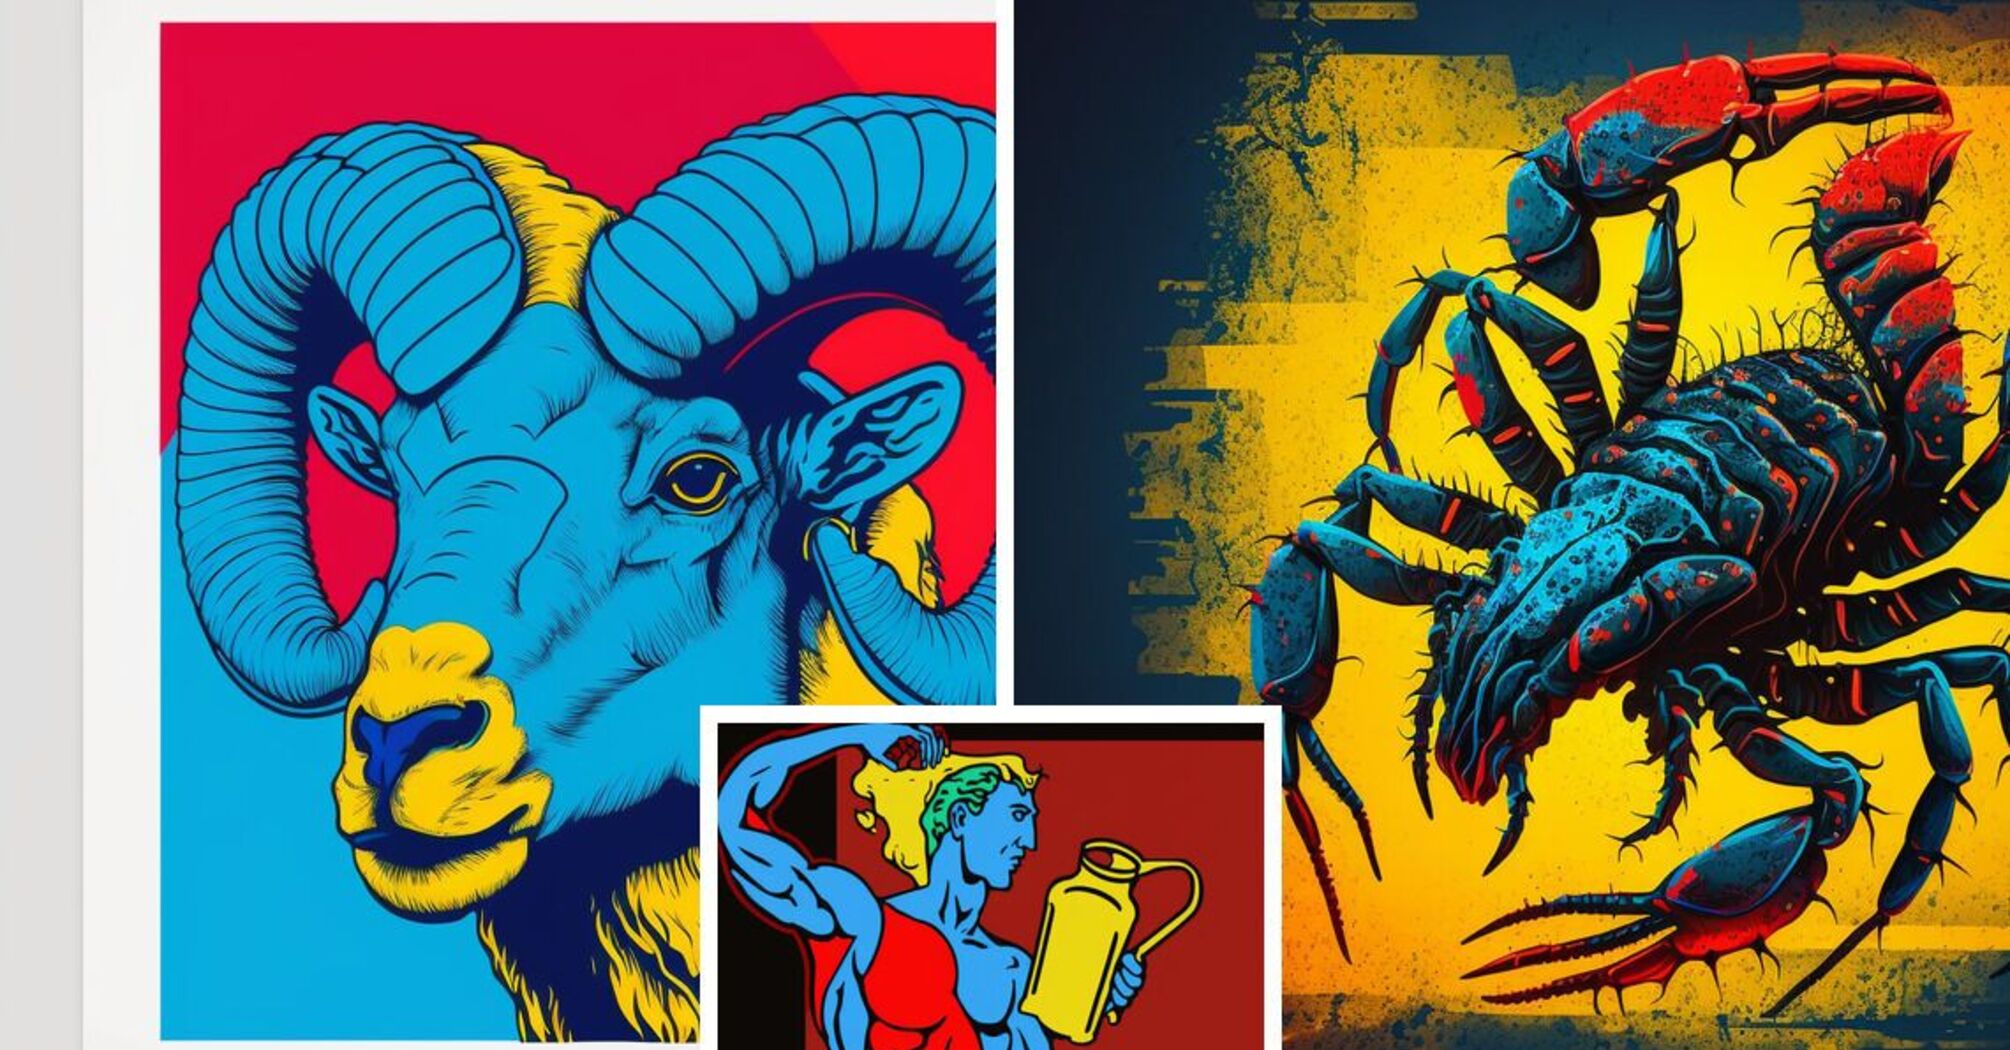 A day of artistic breakthroughs awaits these three zodiac signs: horoscope for July 3 